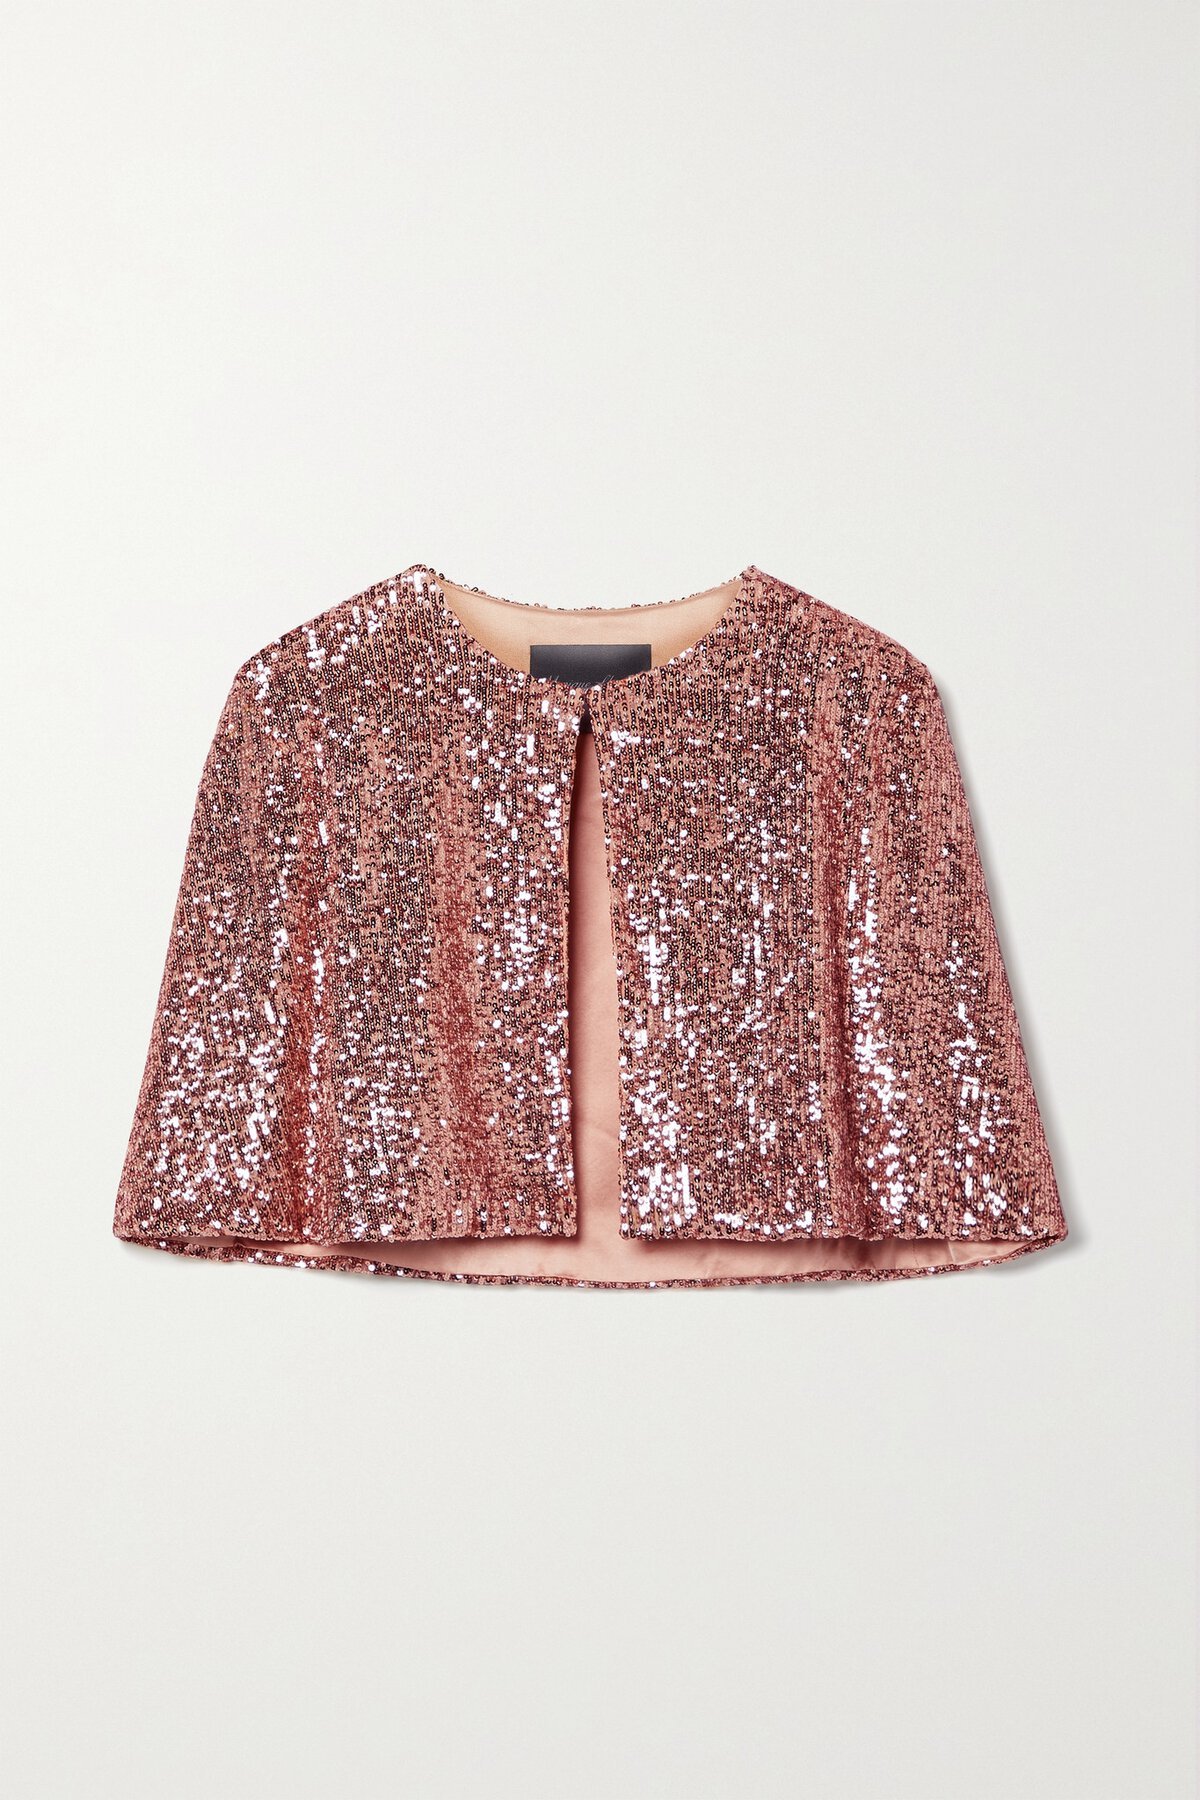 Monique Lhuillier Sequined Stretch-Tulle Cape in Rose Gold.jpg